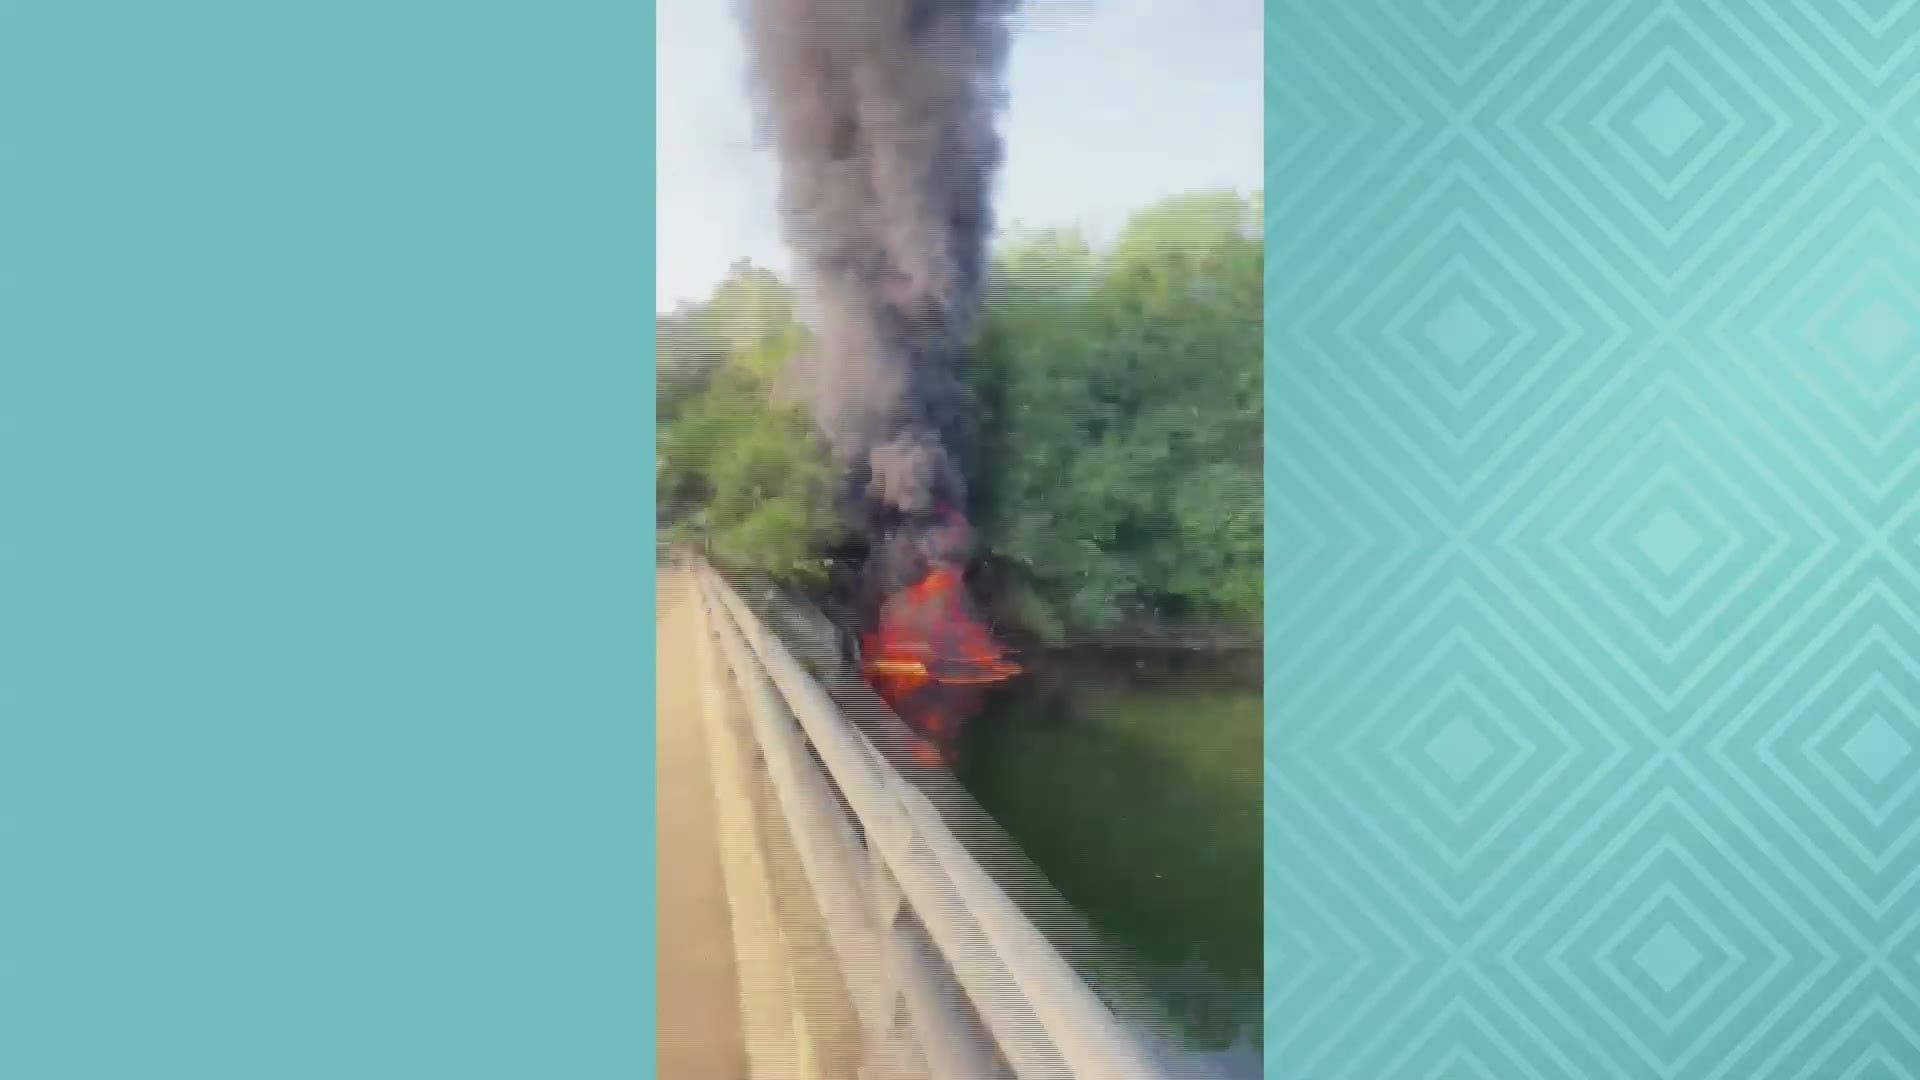 Flames from the tanker spilled over into the Cuyahoga River. The crash took place between Tallmadge and Howe avenues.